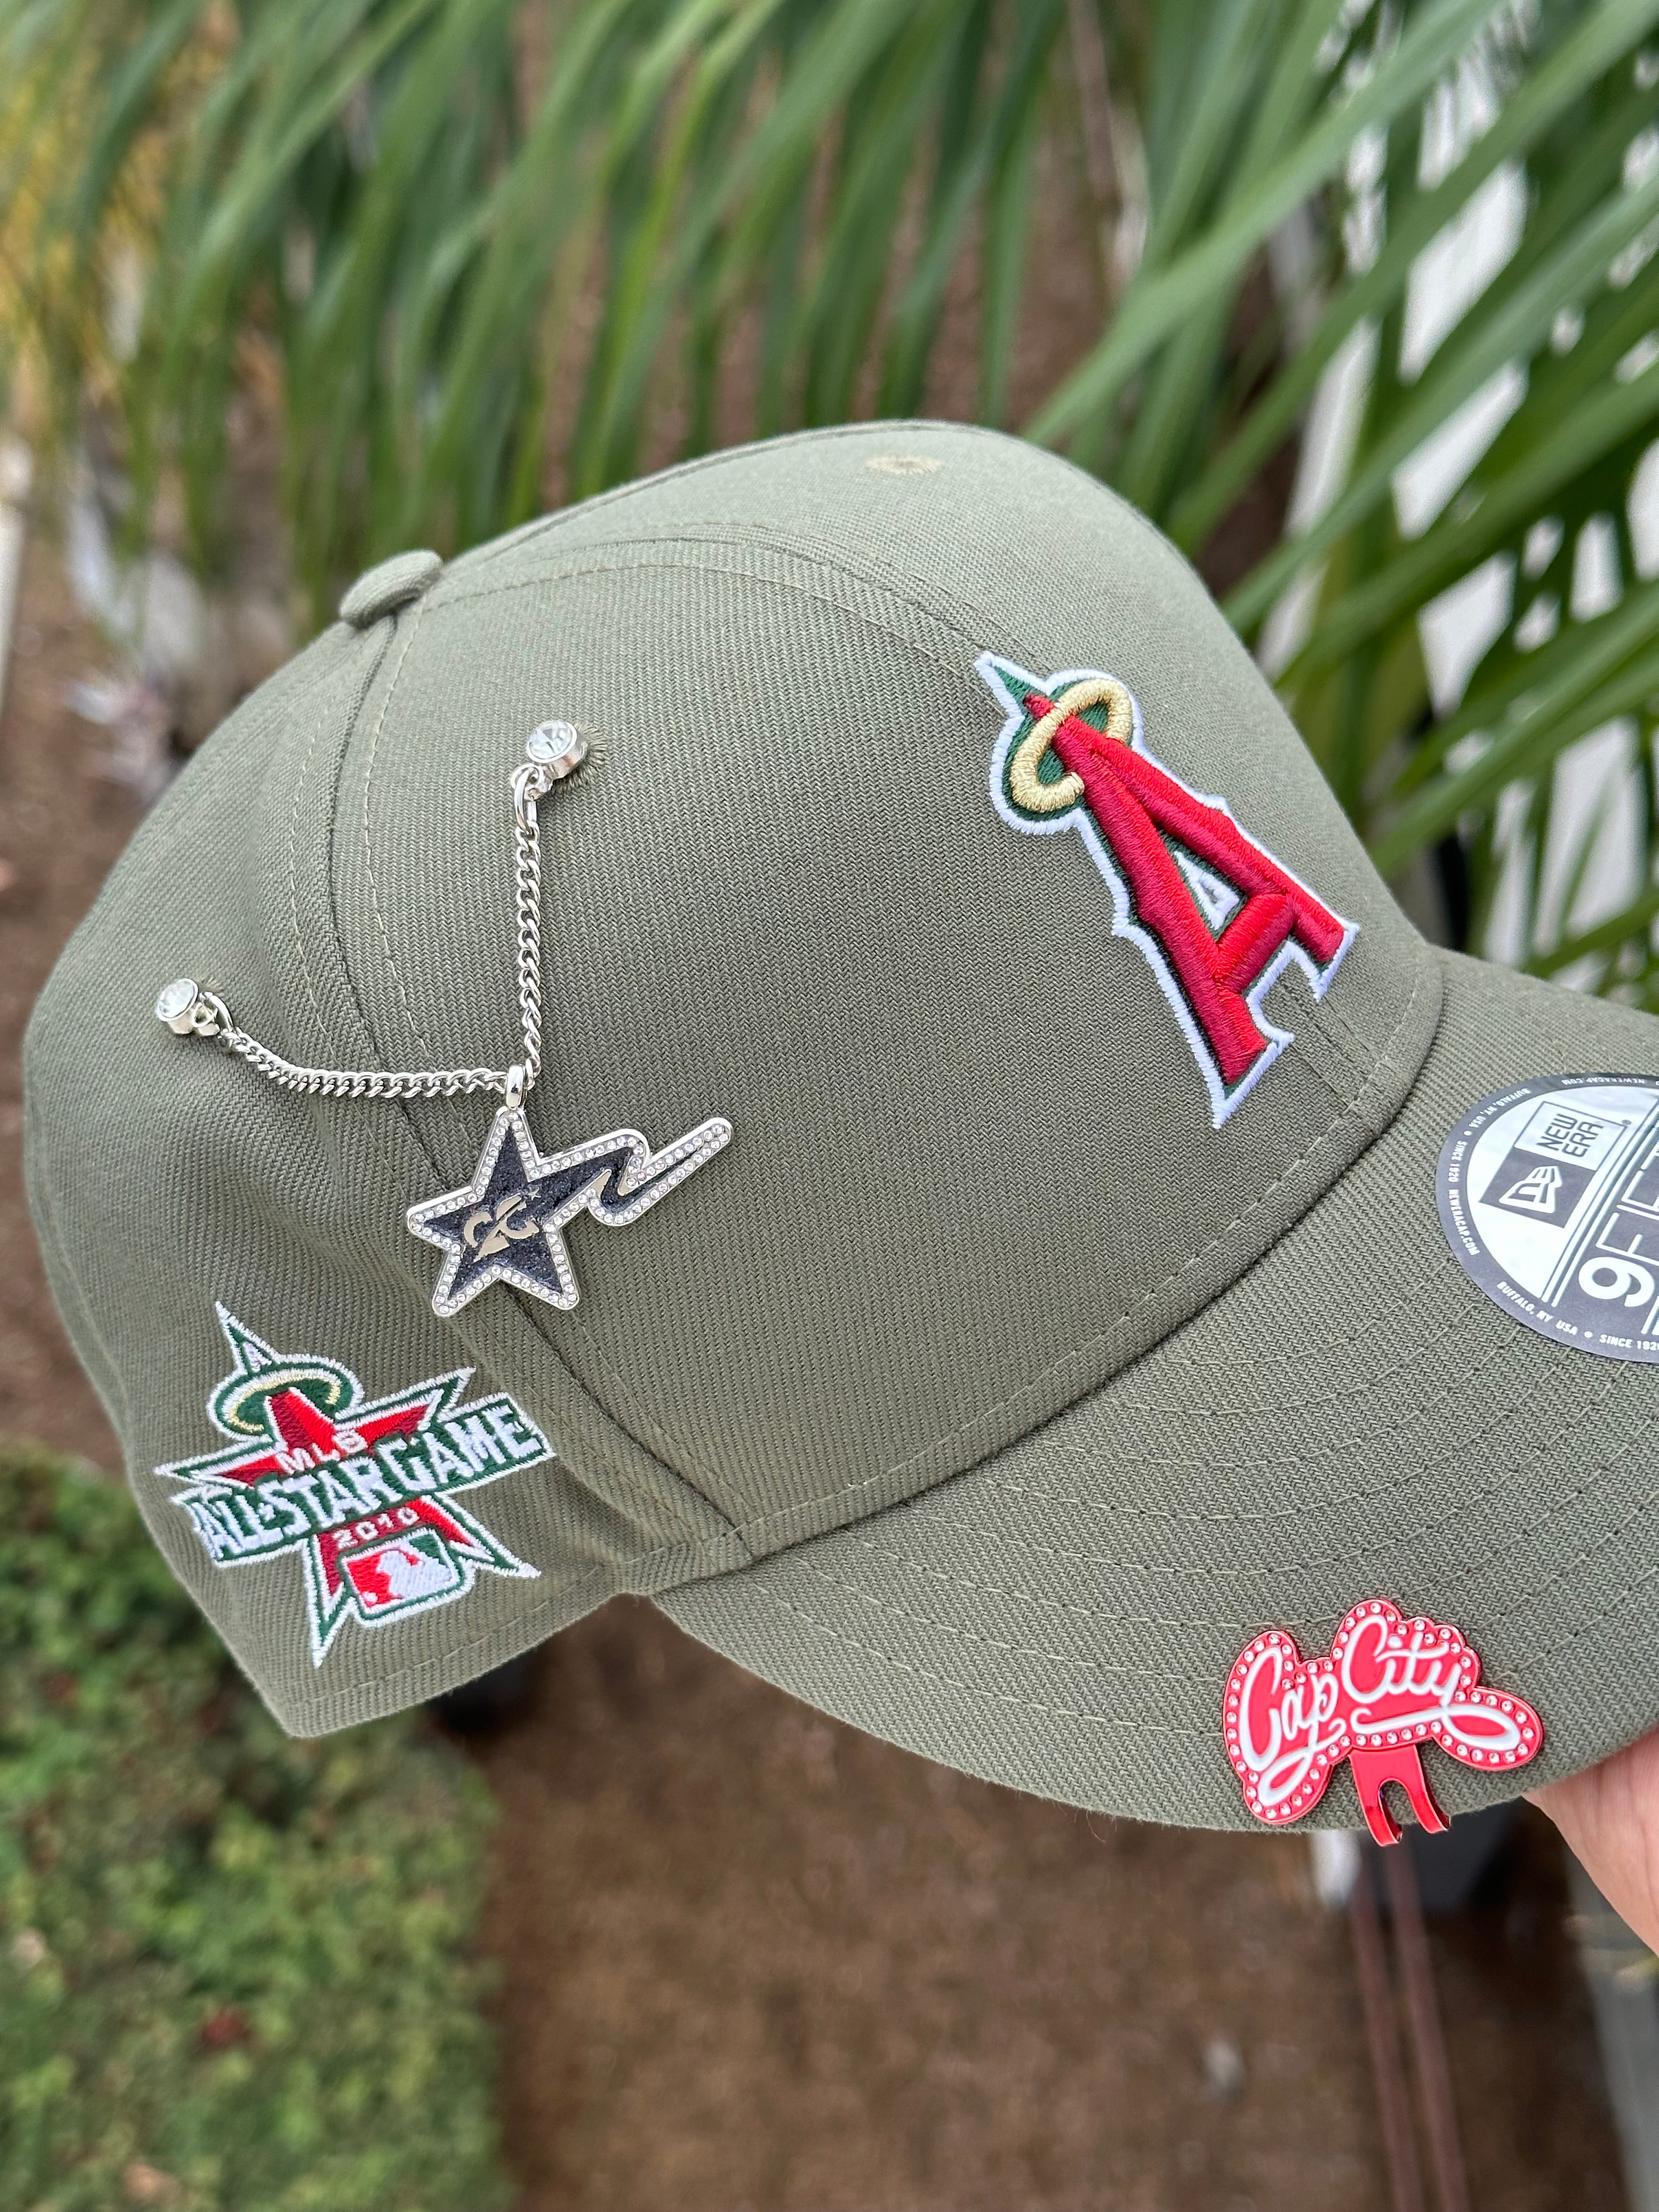 NEW ERA EXCLUSIVE 9FIFTY OLIVE GREEN ANAHEIM ANGELS SNAPBACK W/ 2010 ASG PATCH